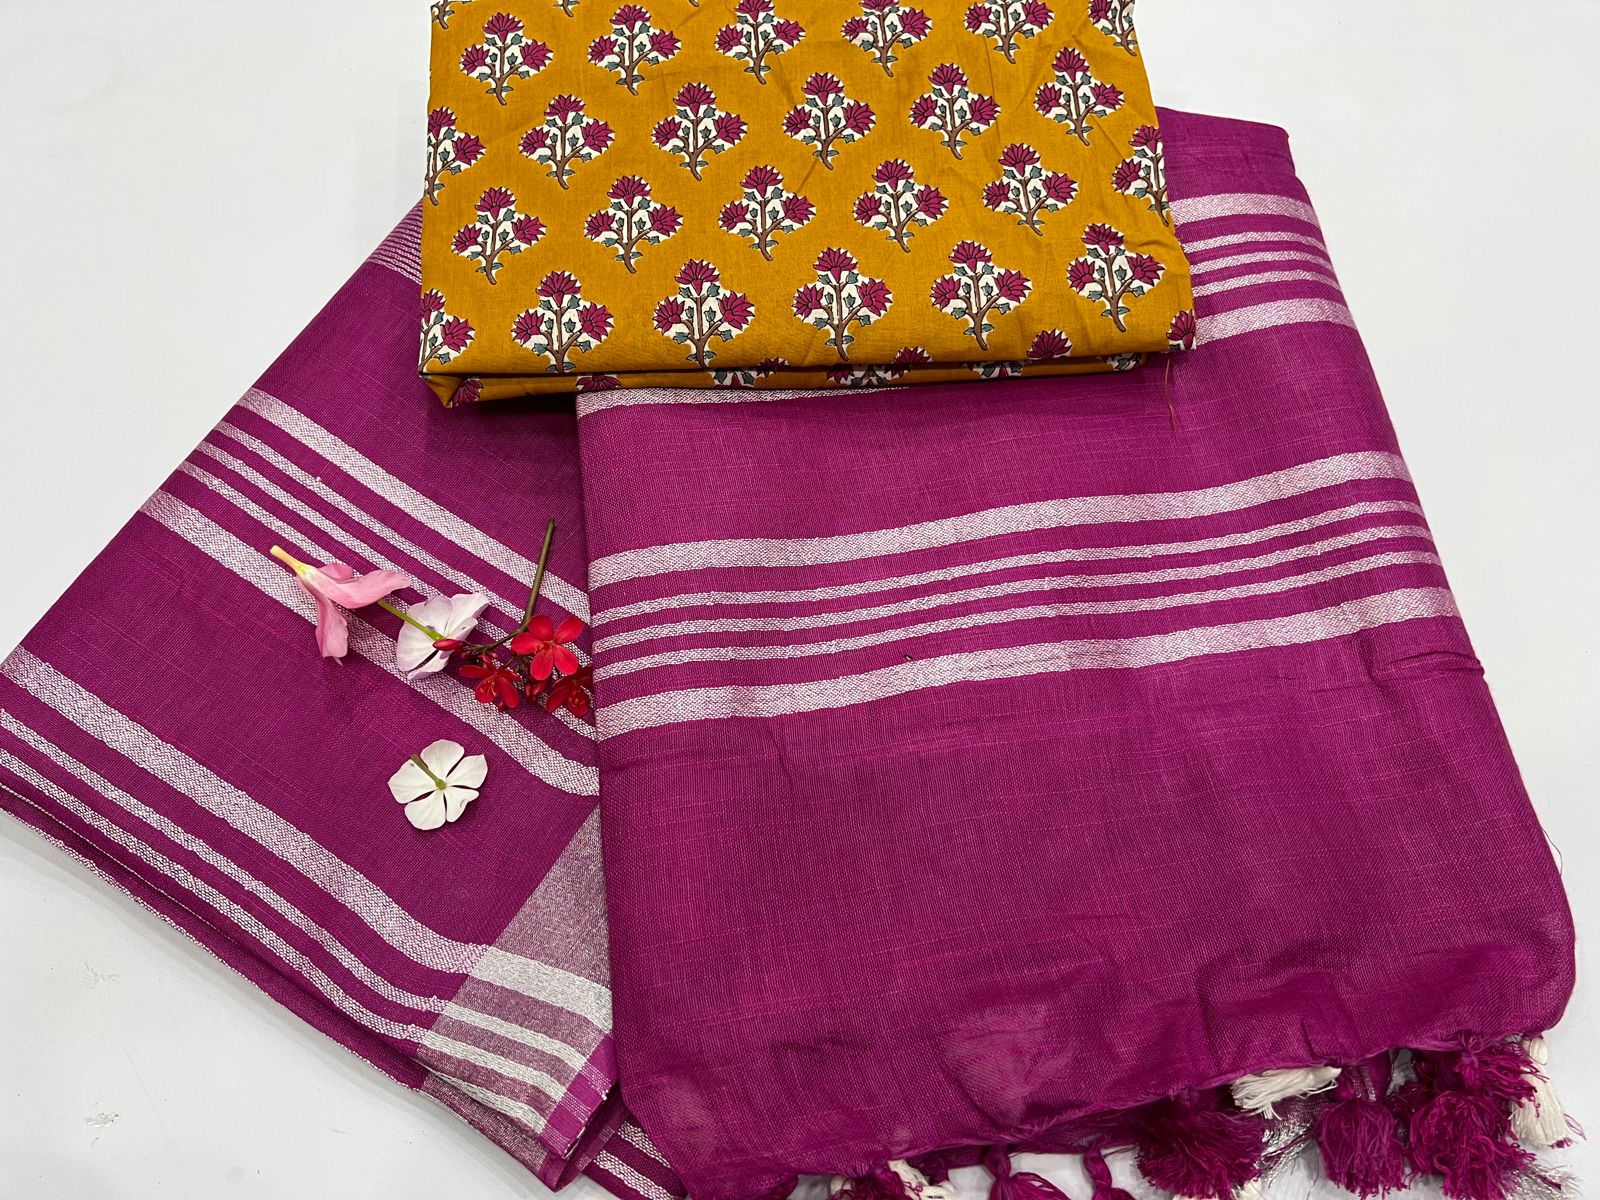 Tyrian Purple linen sarees with price and printed cotton blouse